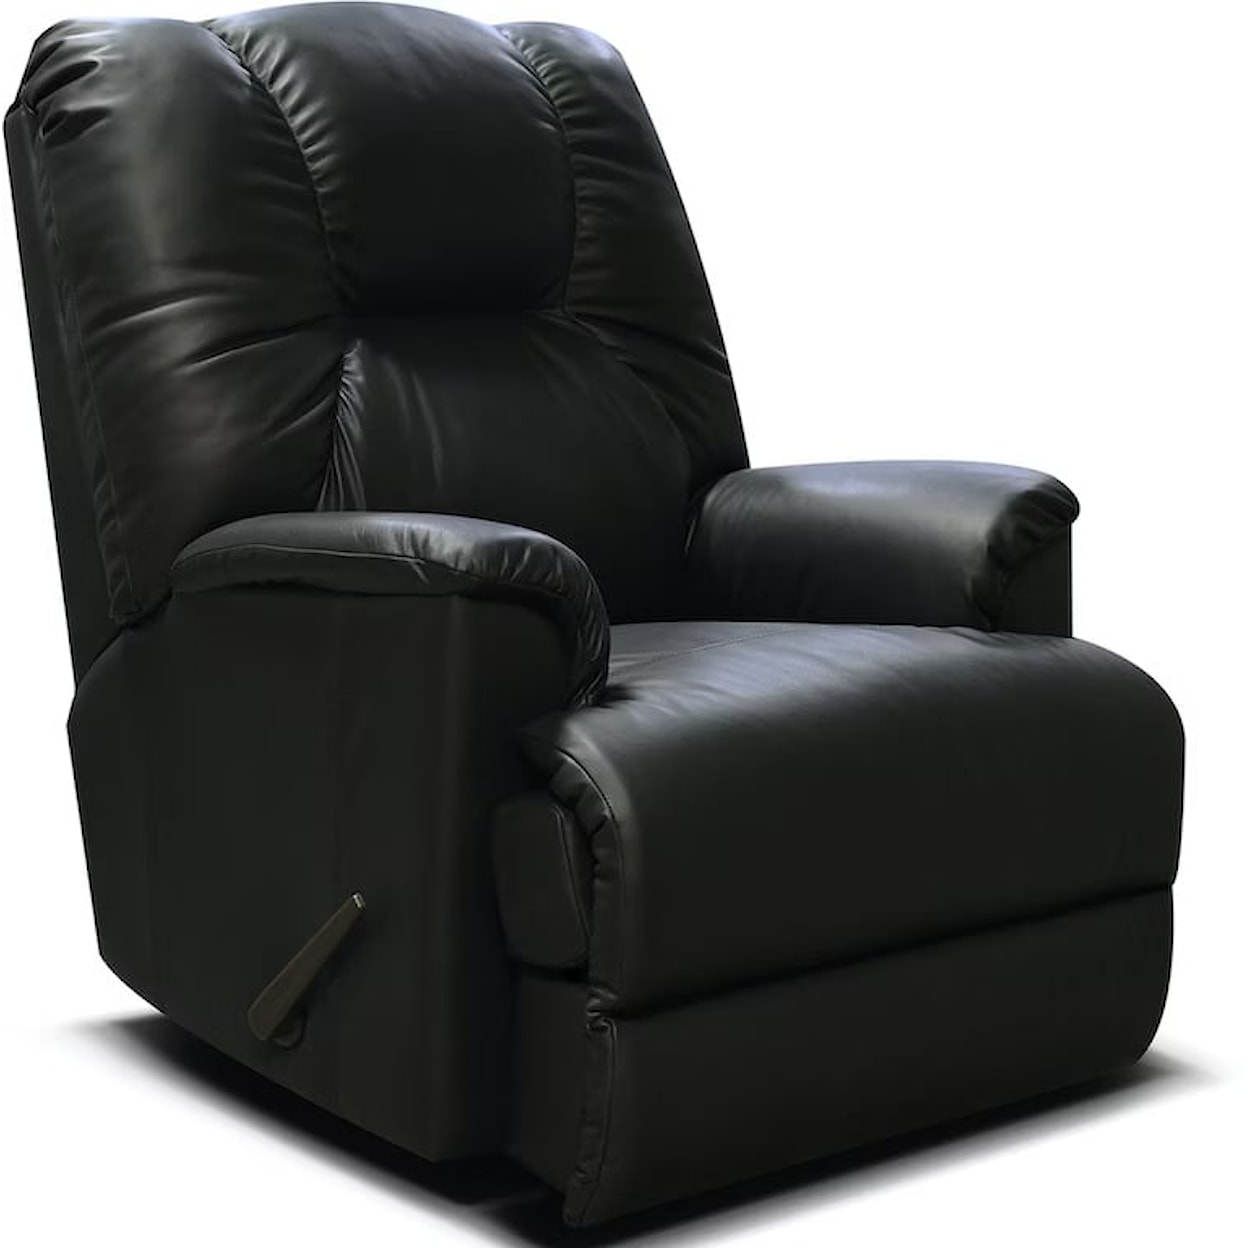 Dimensions EZ5W00 Series Leather Swivel Gliding Recliner